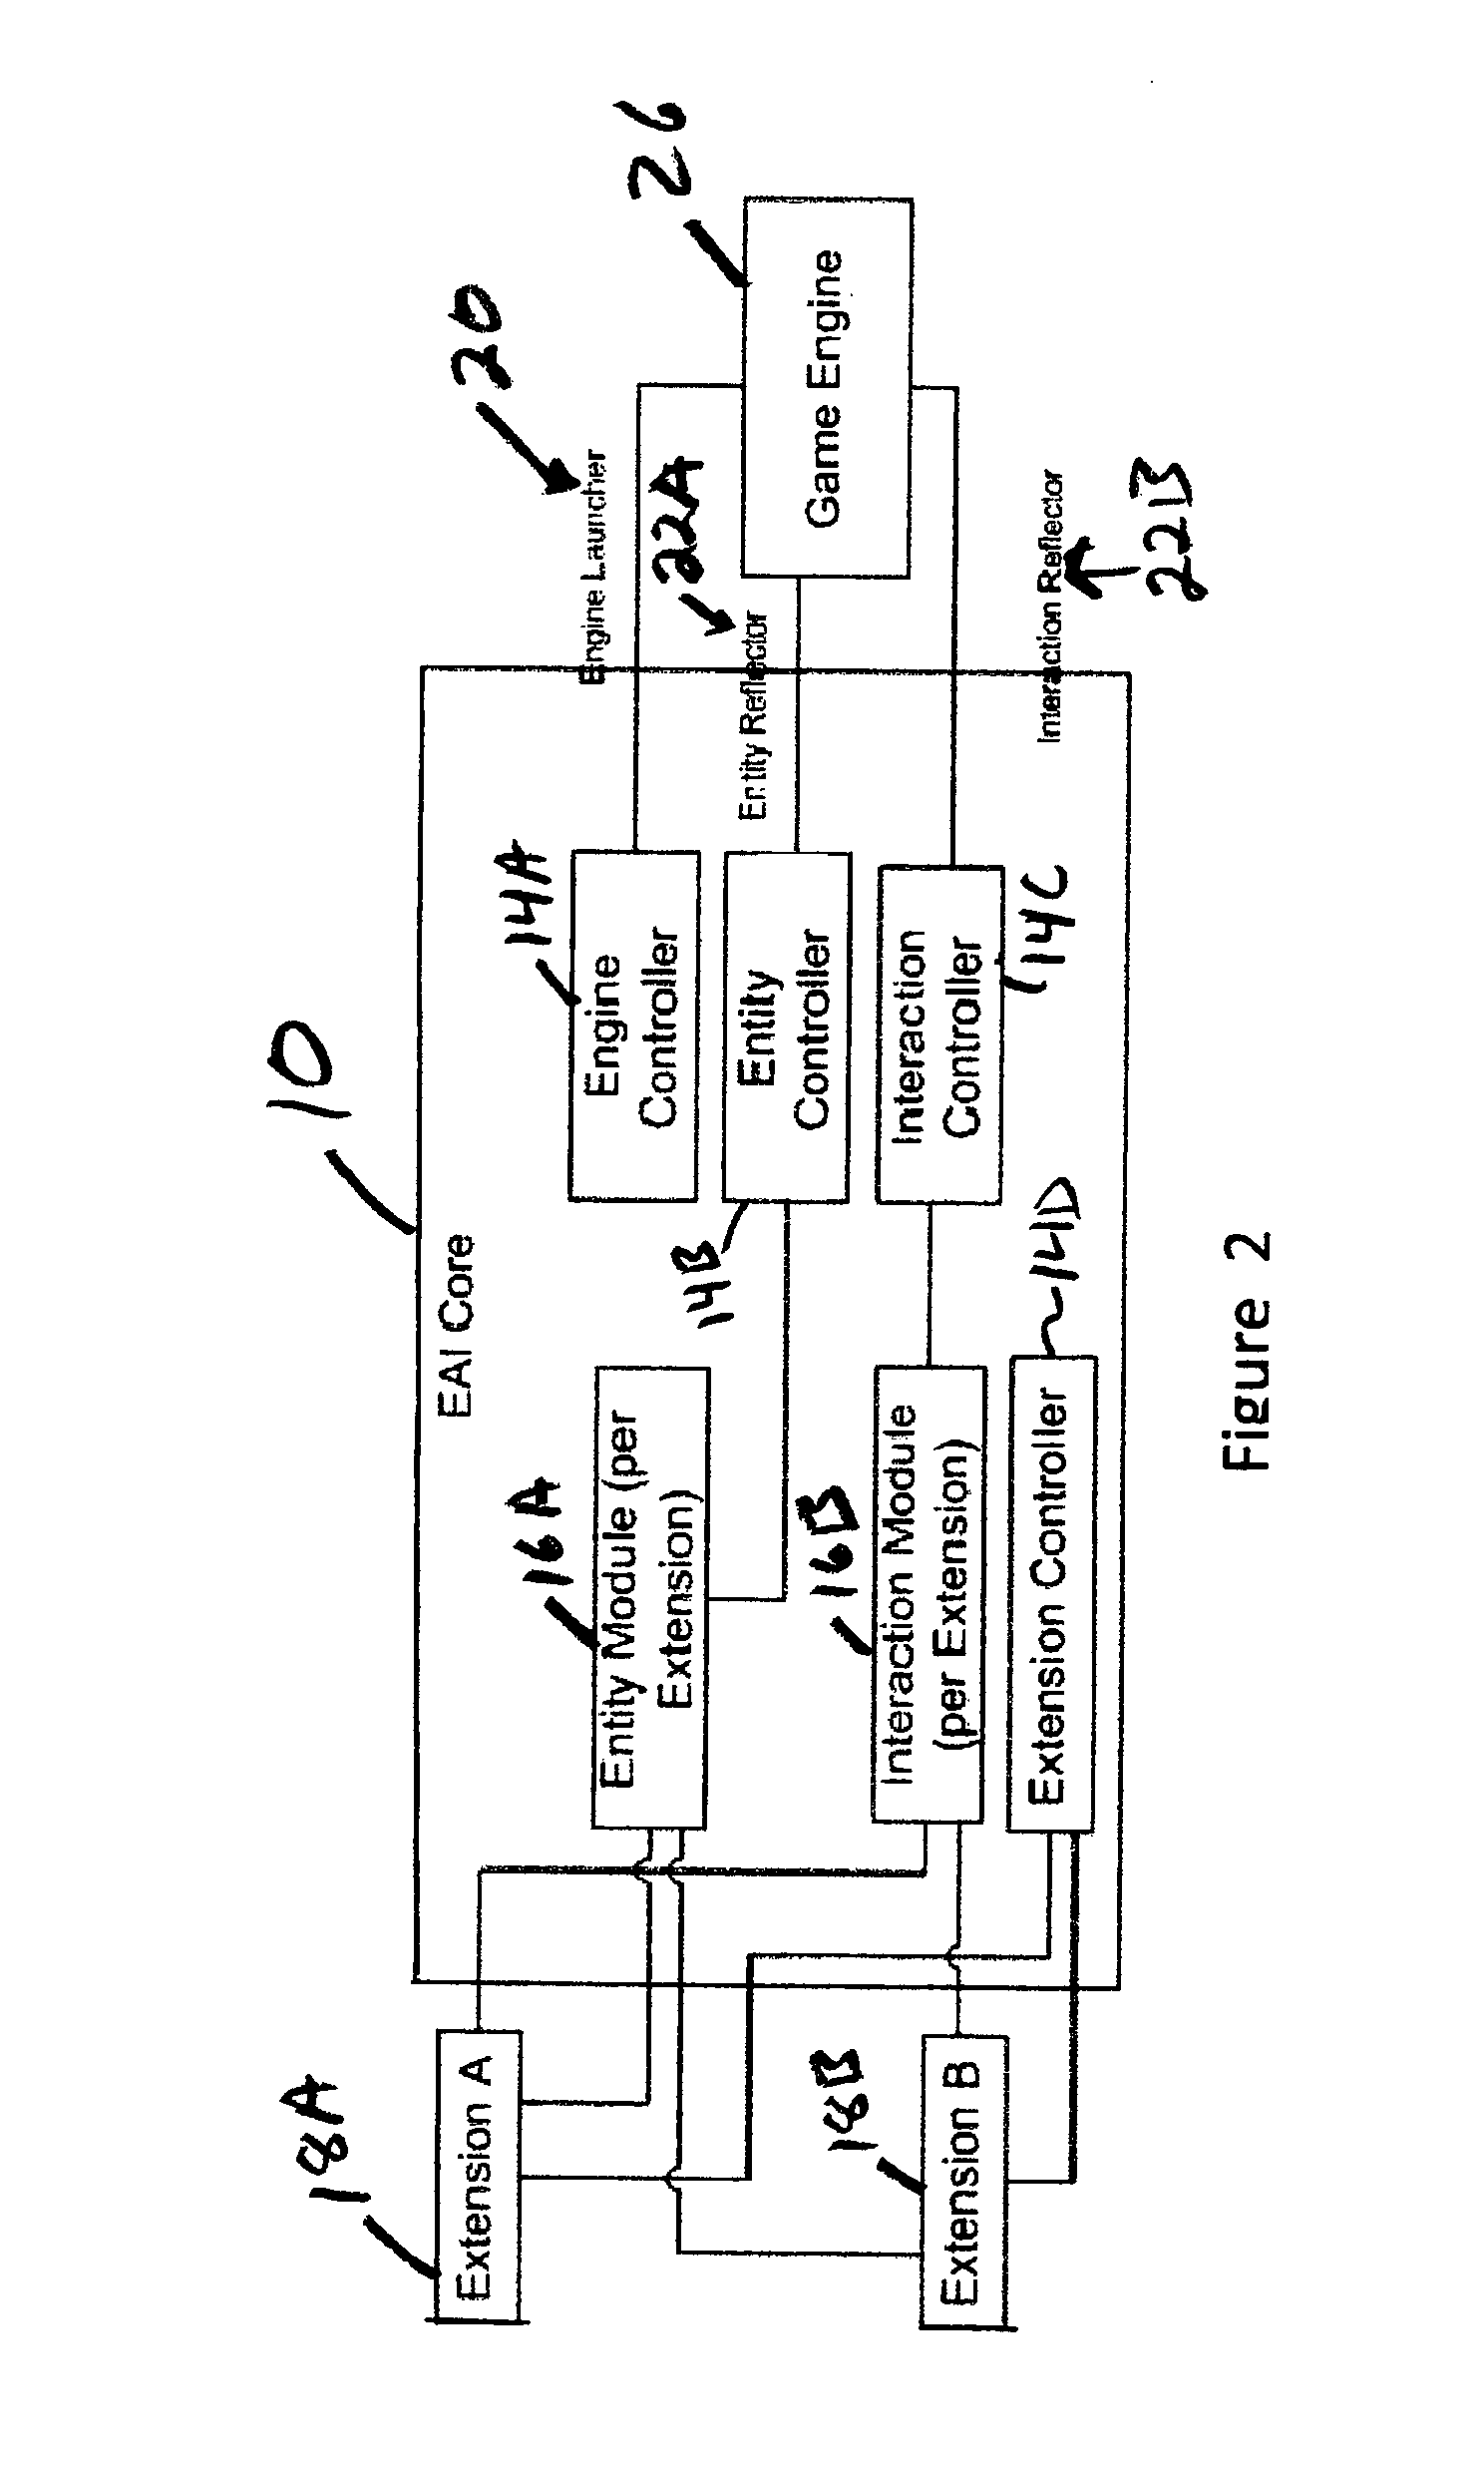 Engine agnostic interface for communication between game engines and simulation systems